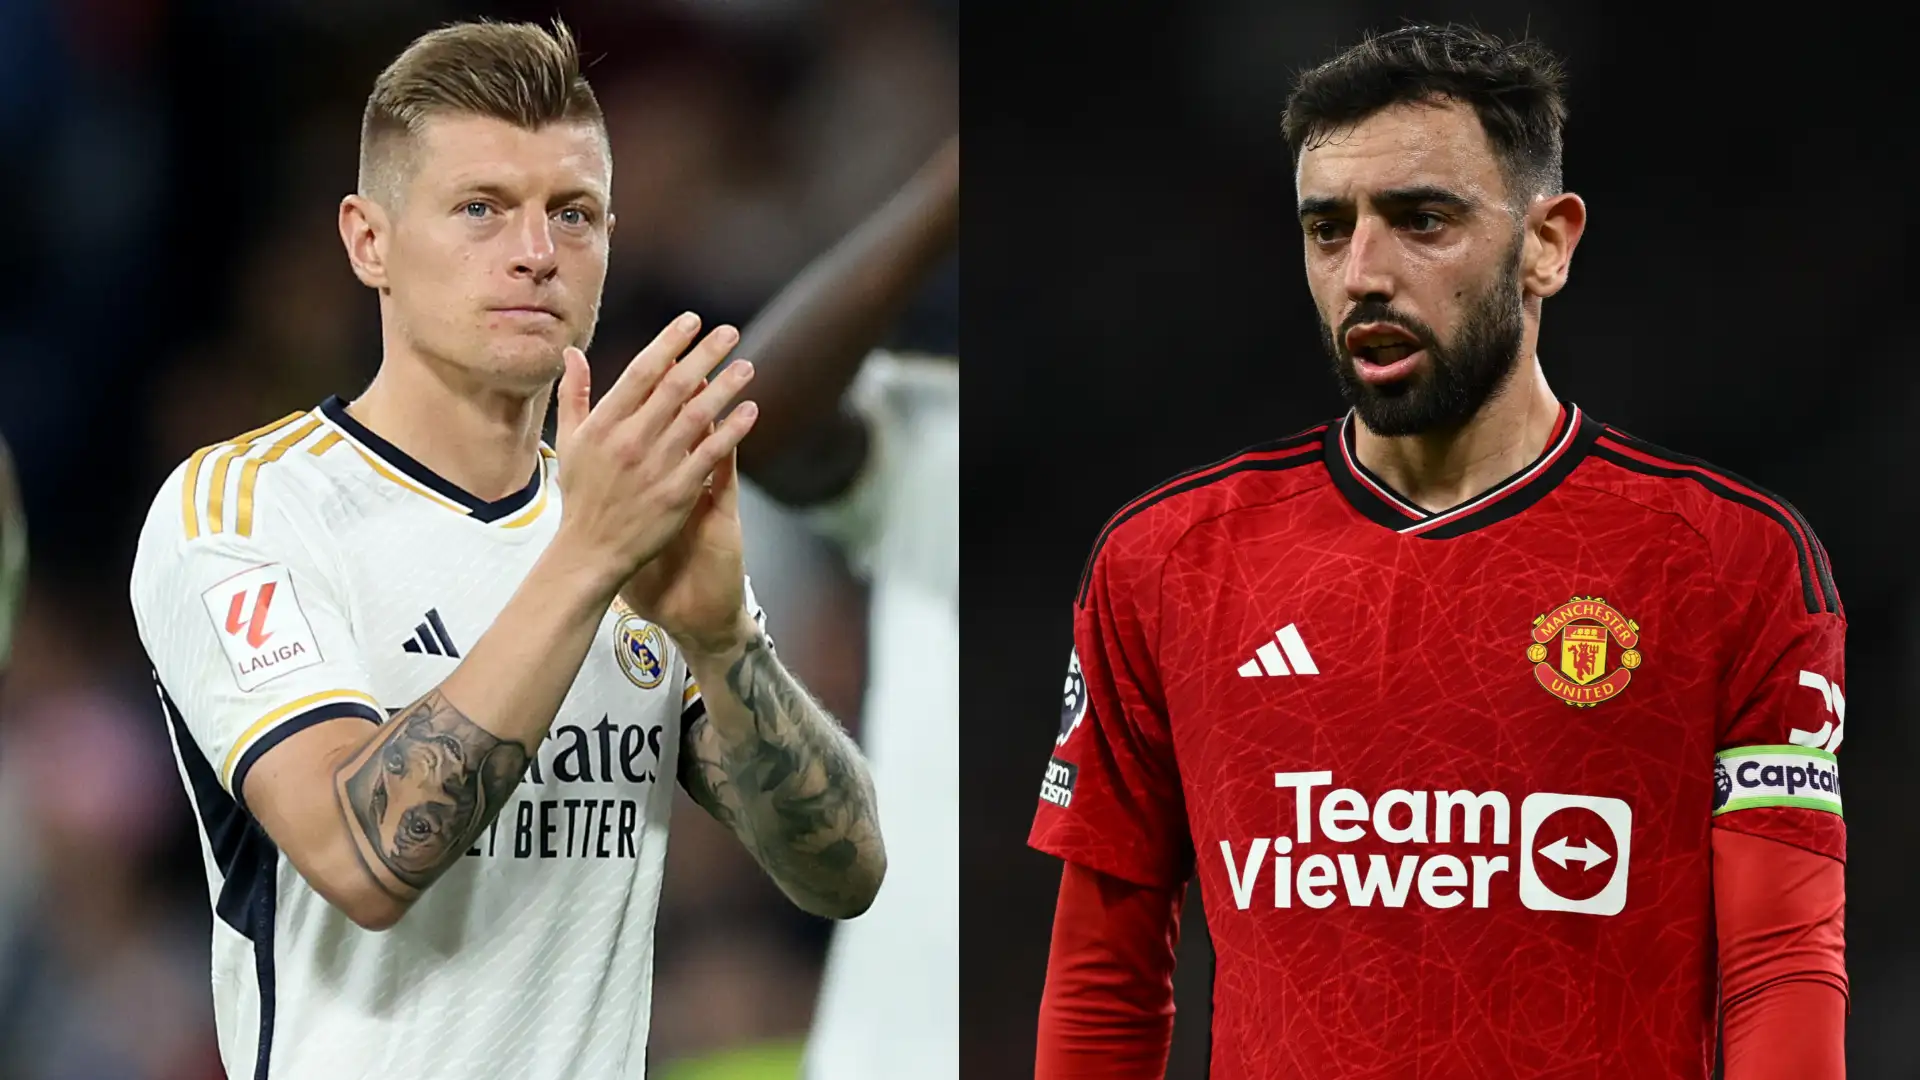 Man Utd star Bruno Fernandes sends classy message to Toni Kroos after Real Madrid and Germany icon announces retirement